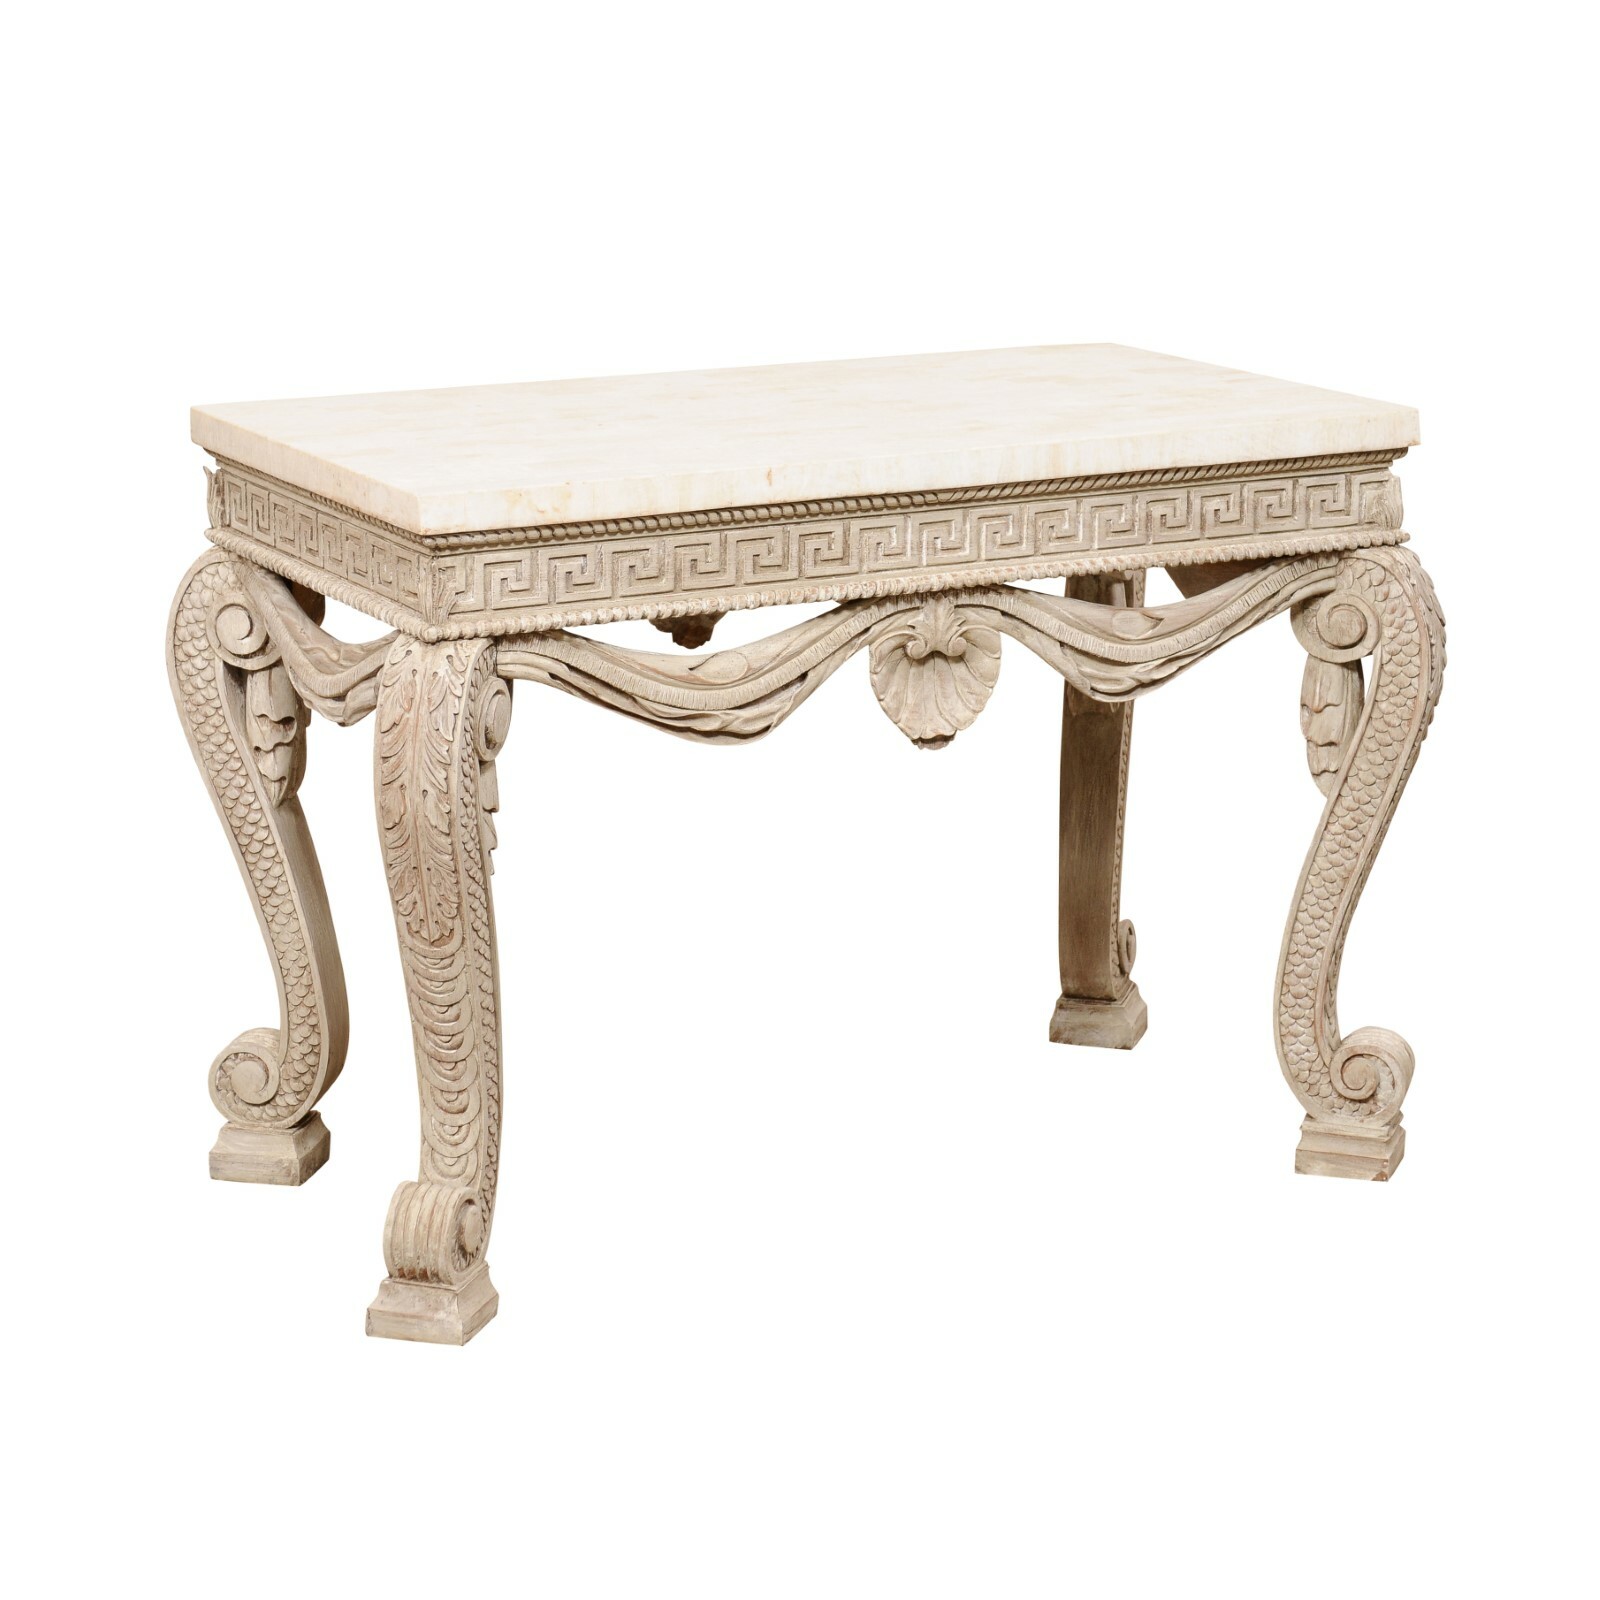 English Carved-Wood Table w/Travertine Top